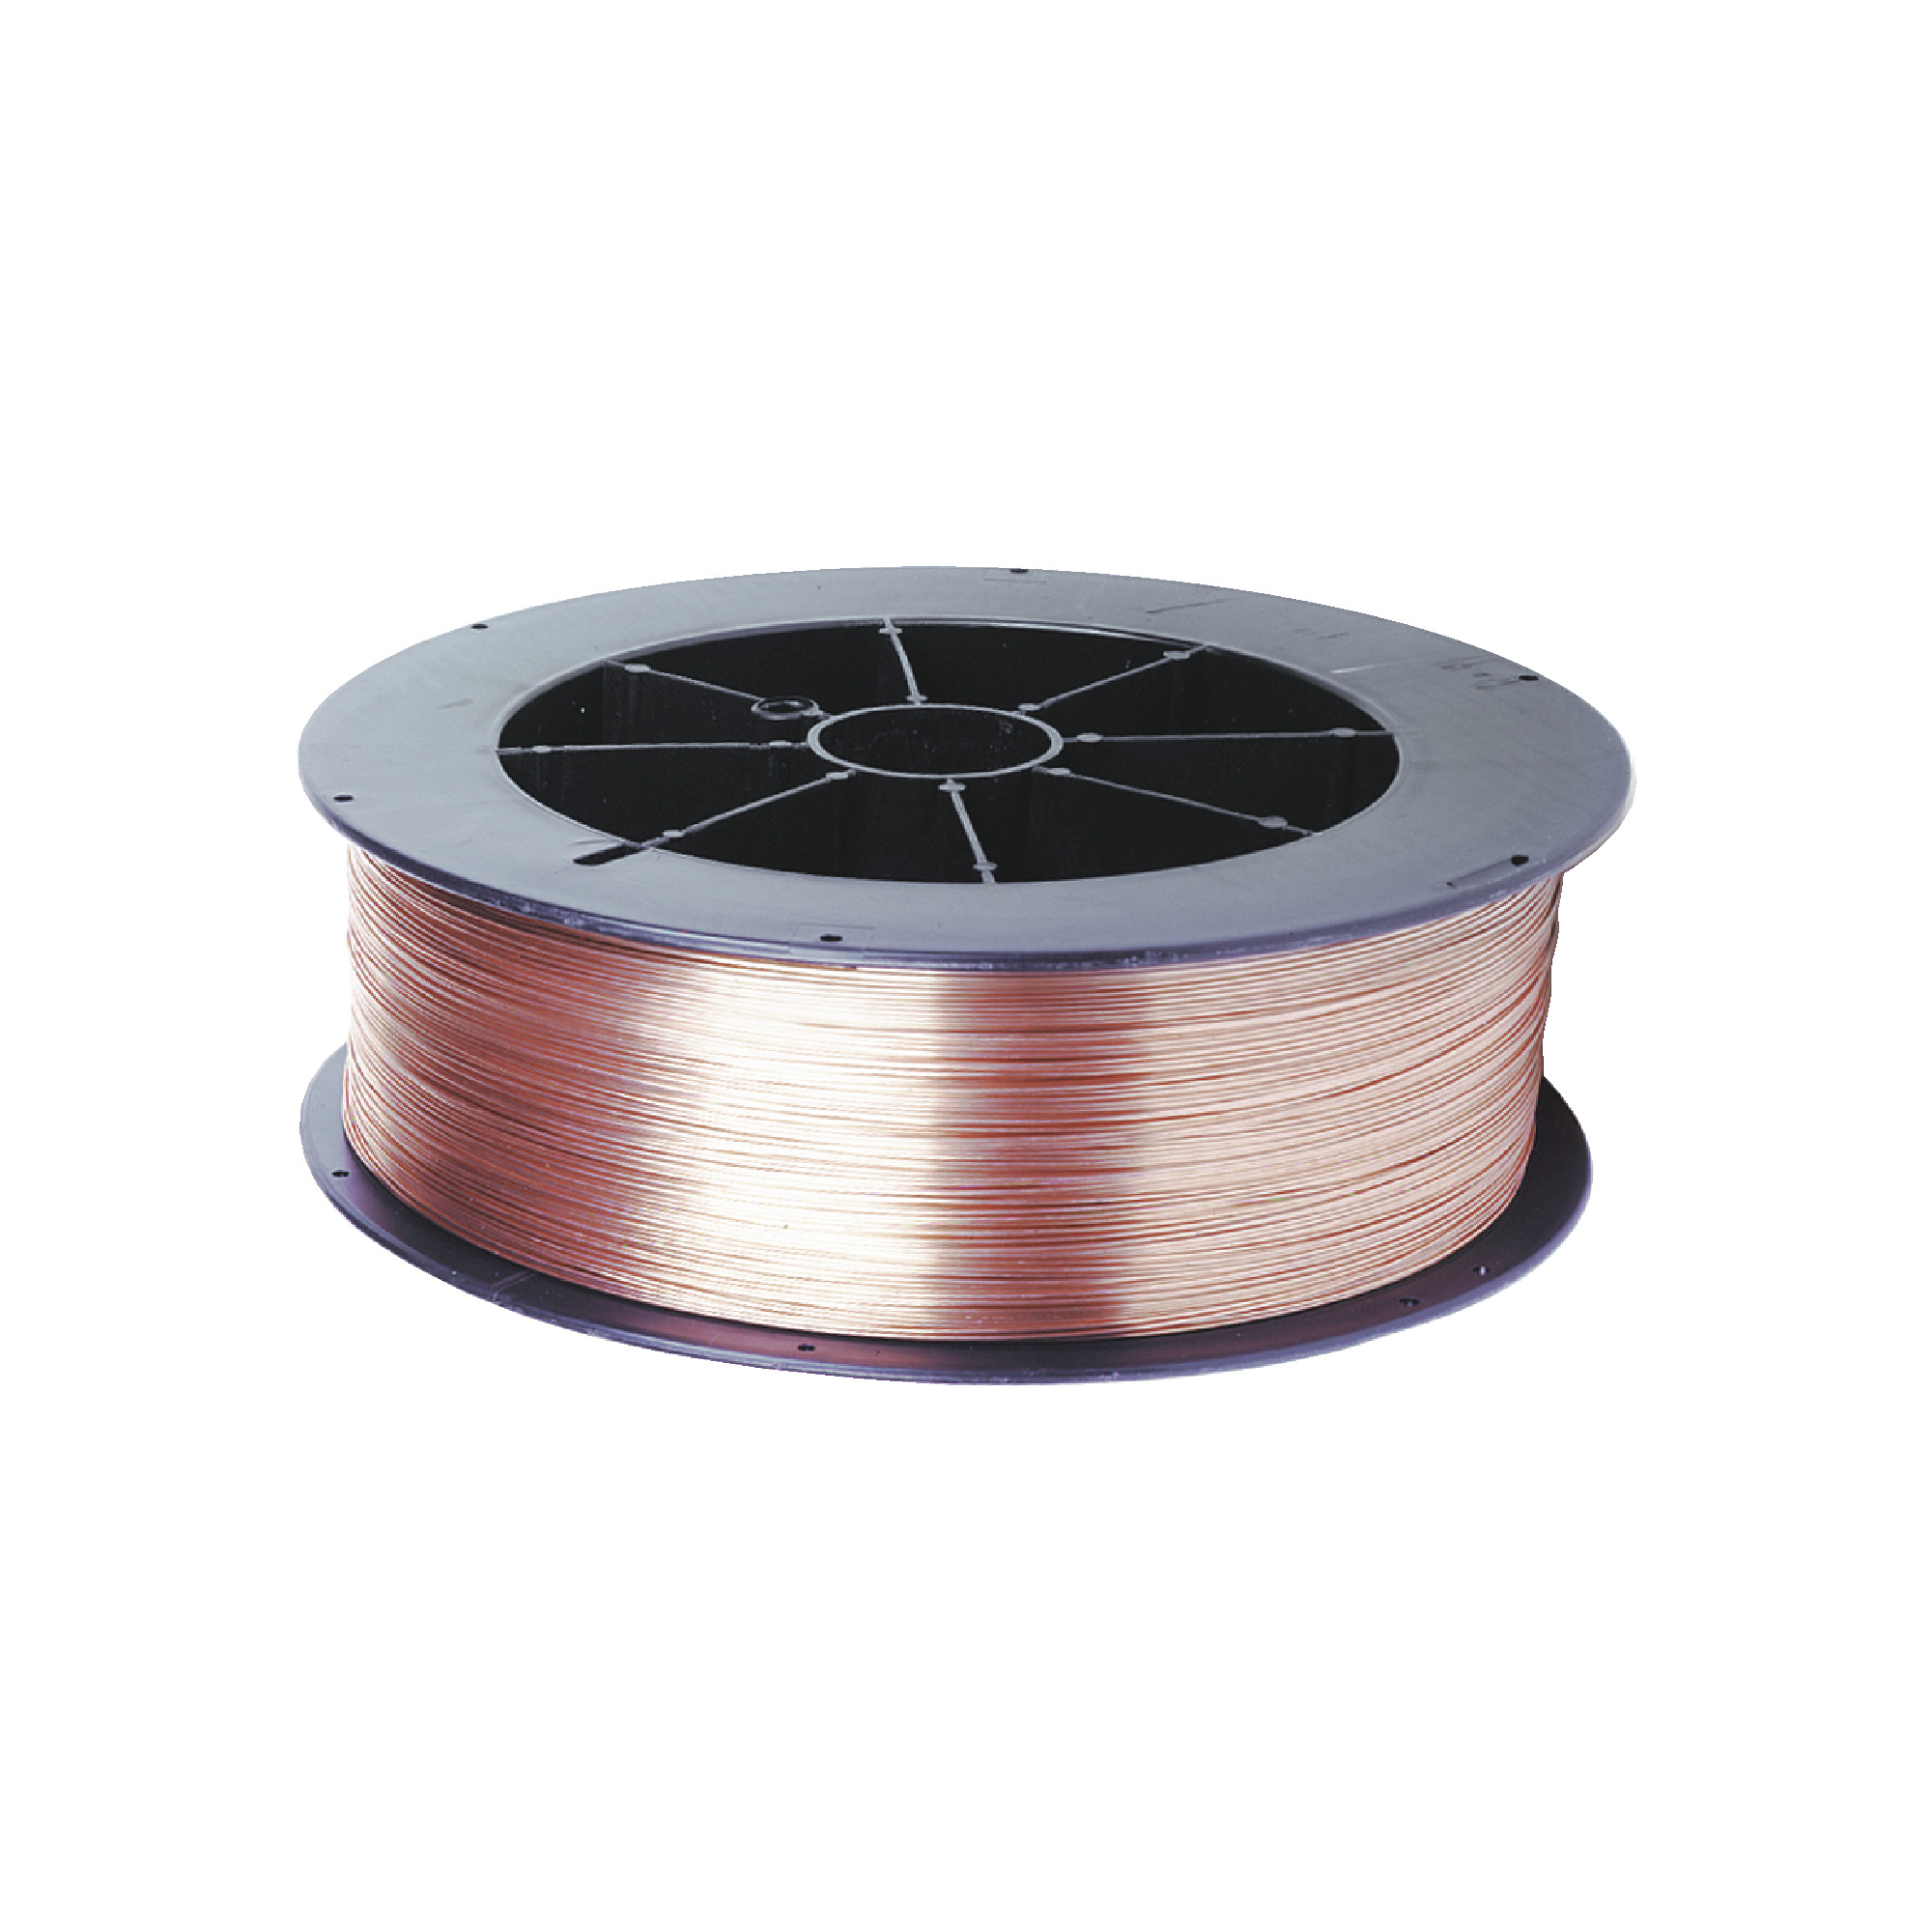 .025" ER70S-6 Super Arc L-56 Copper Coated Carbon Steel MIG Welding Wire - 2 lbs. Spool